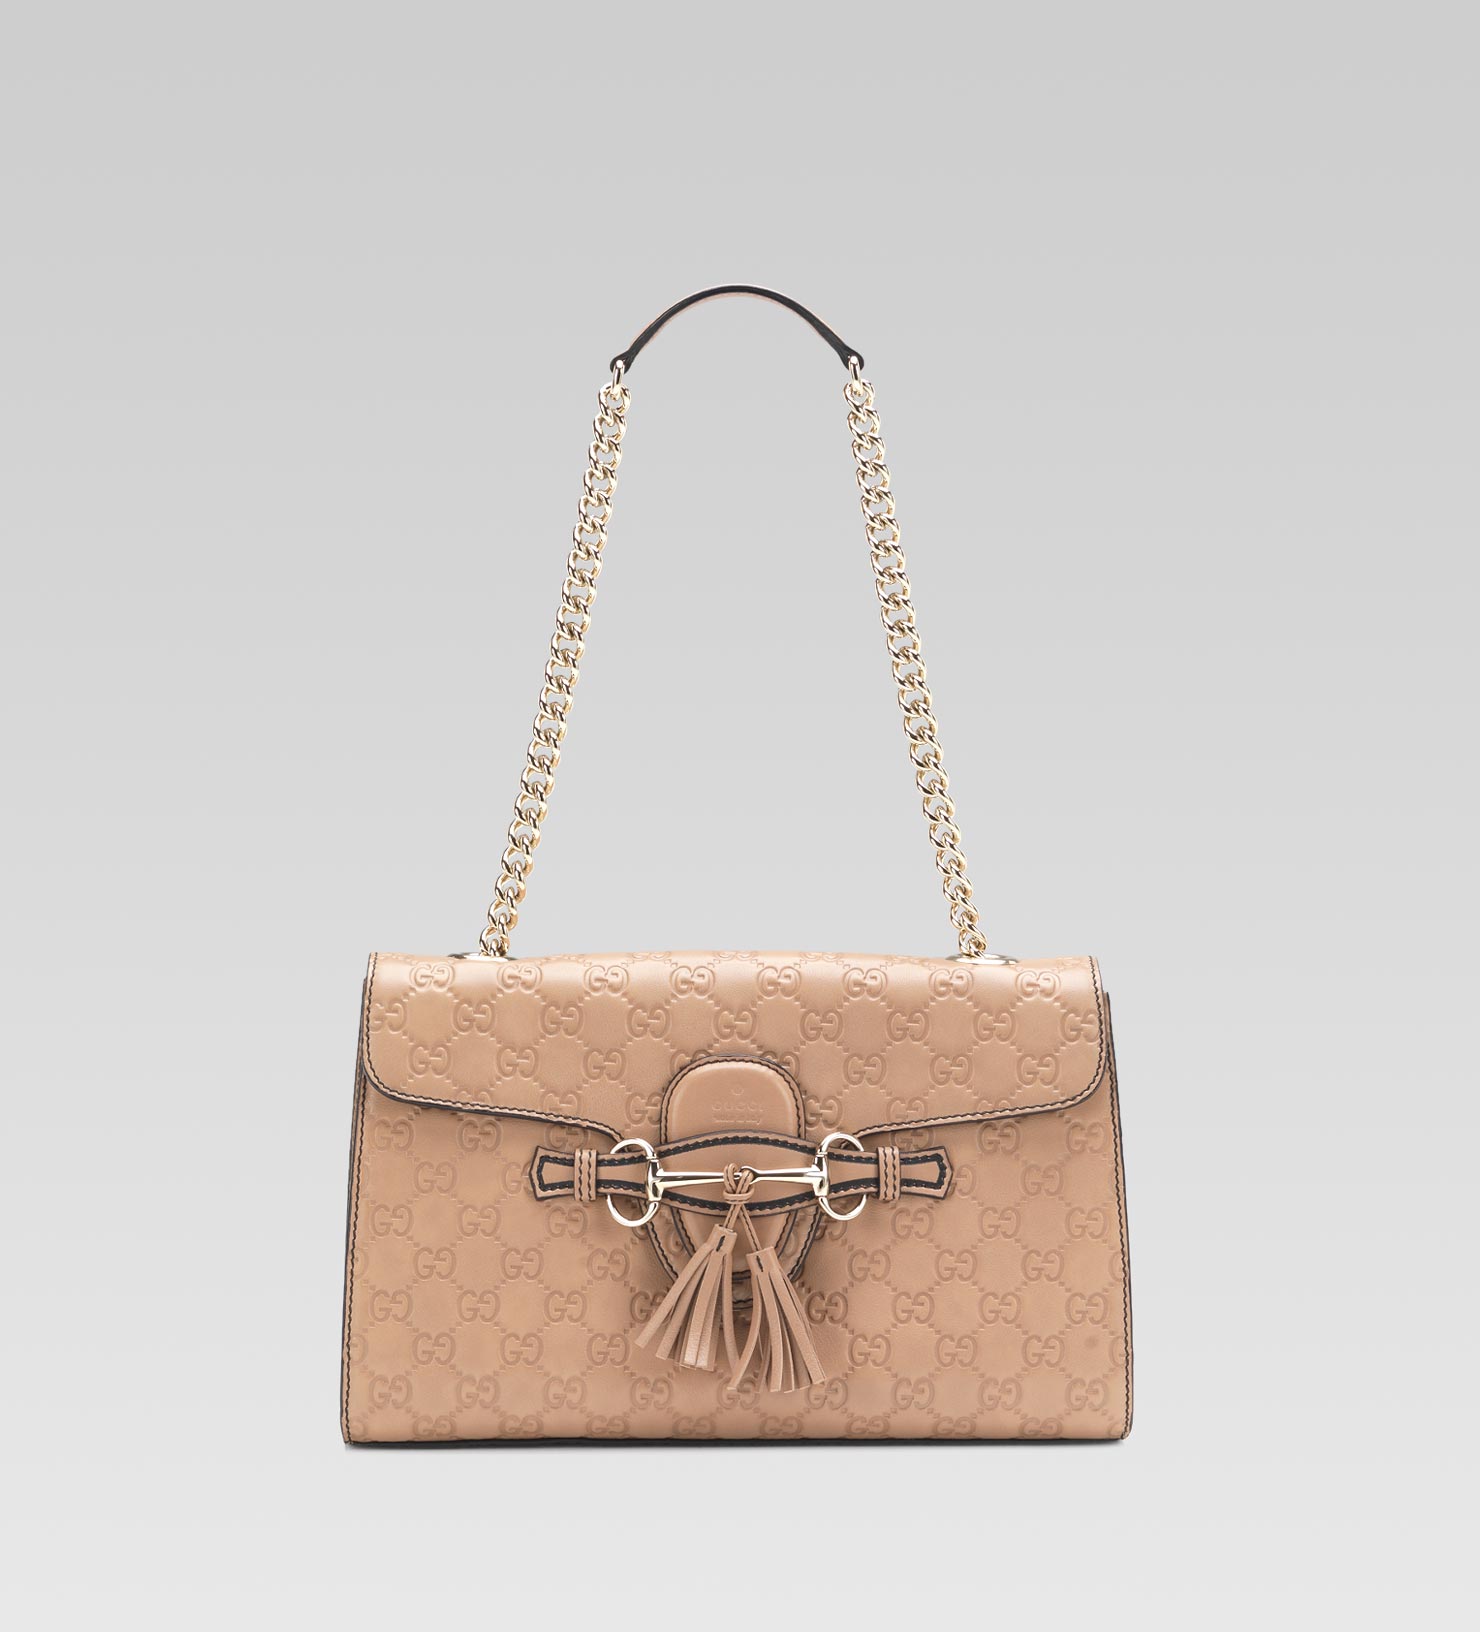 Lyst - Gucci Emily Guccissima Leather Chain Shoulder Bag in Brown